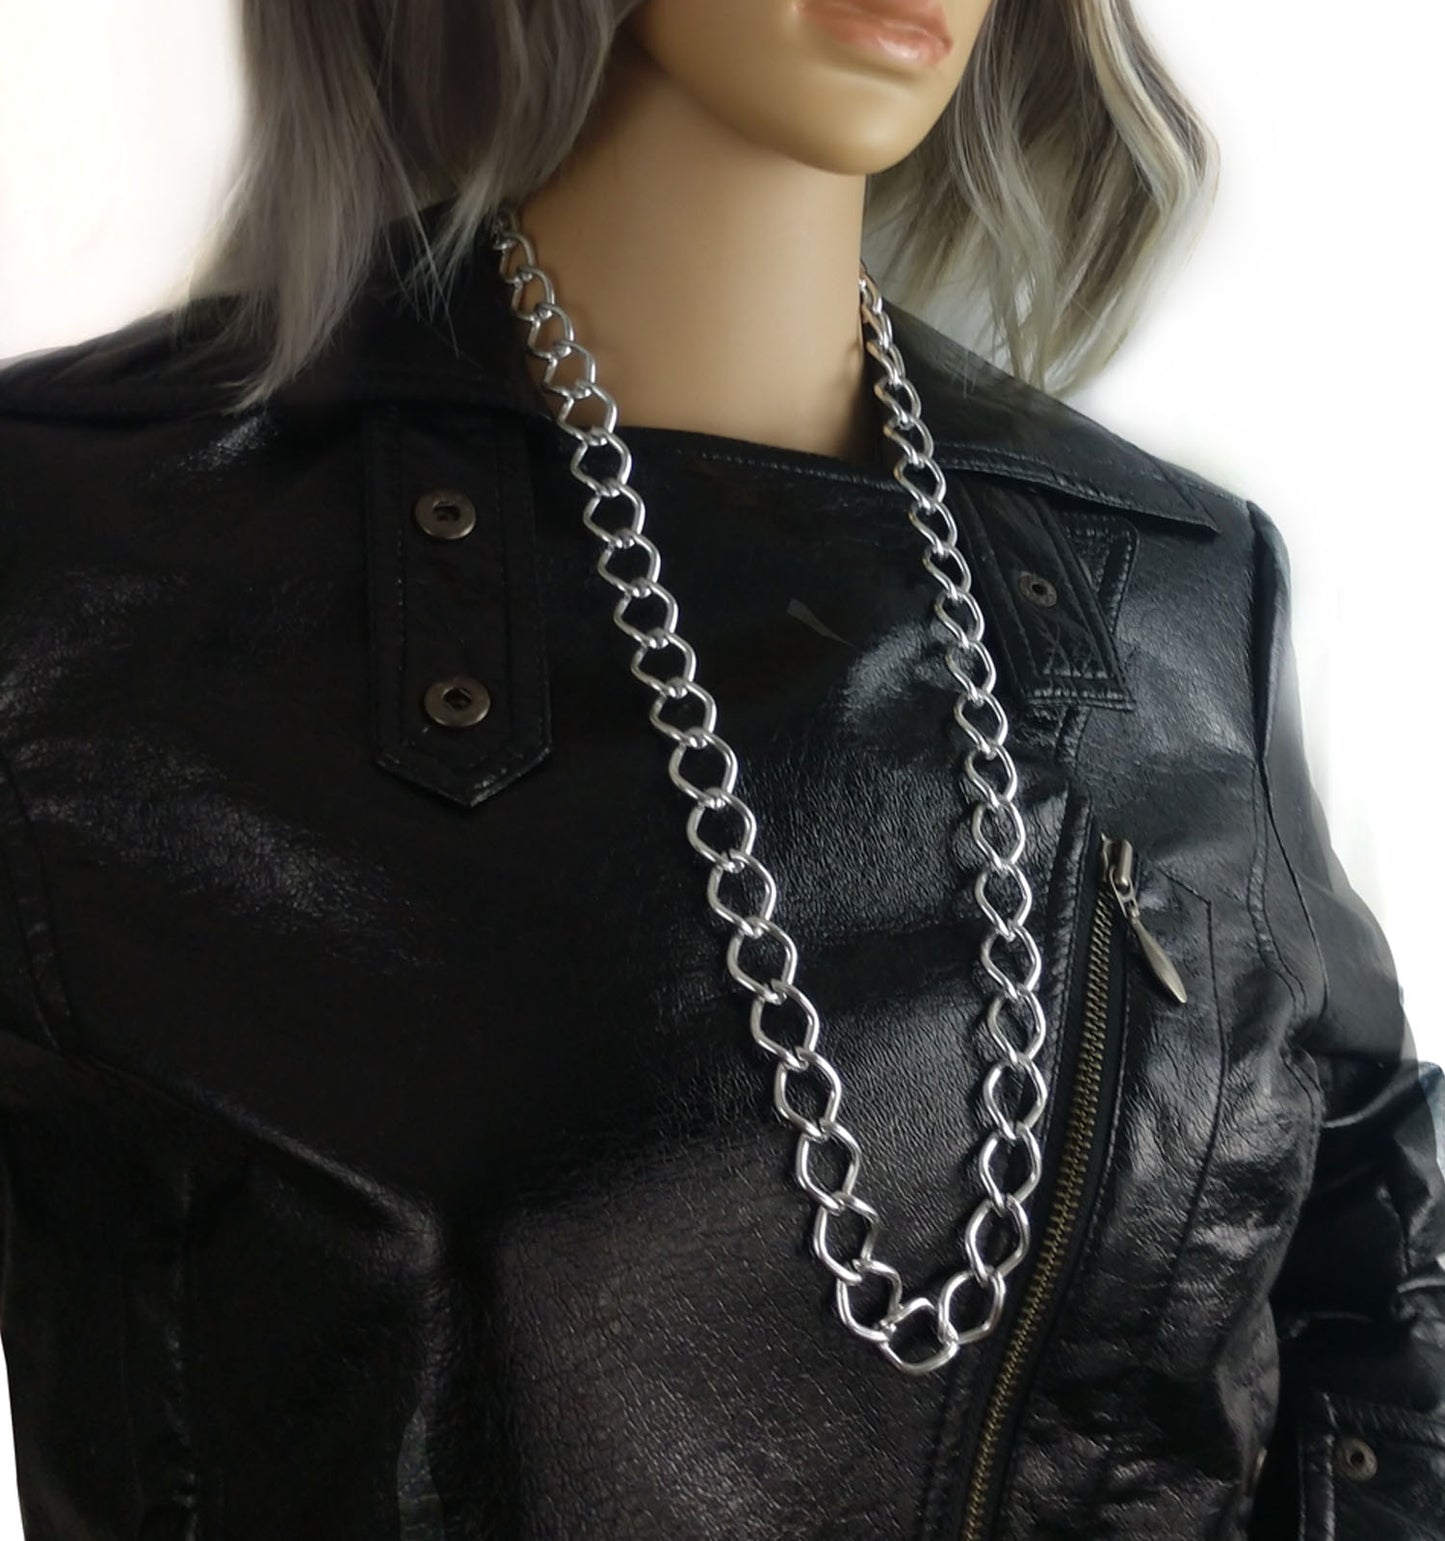 Heavy Metal Chunky Big Lightweight Long Curb Chain Punk Necklace 30" Silver Tone